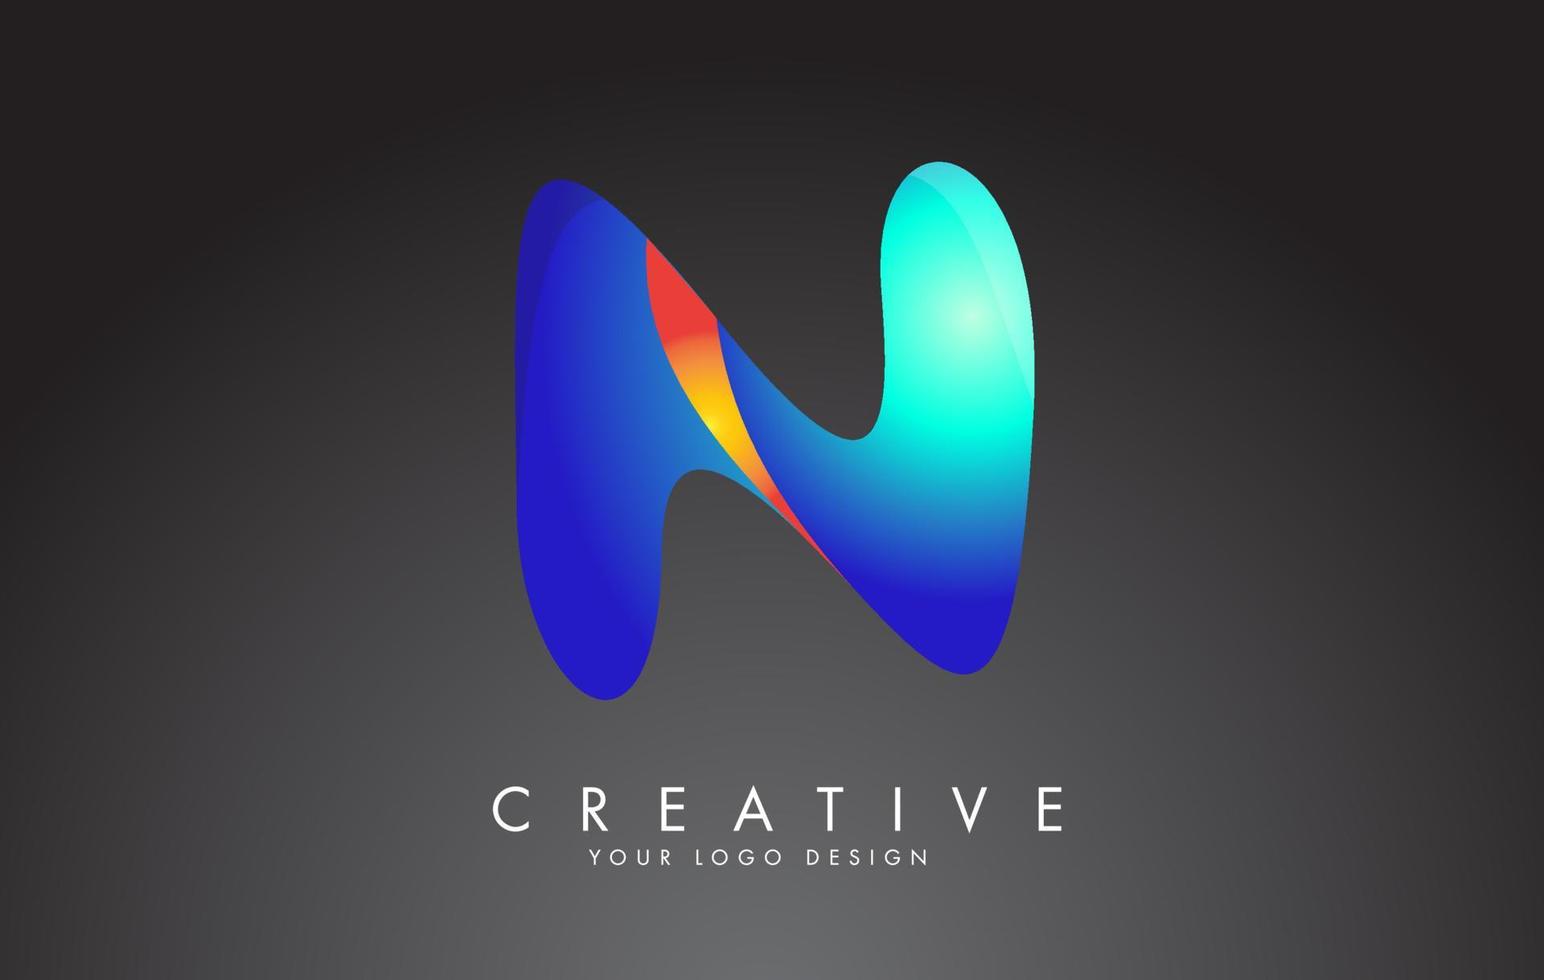 Colorful N letter logo with twisted lines effect. Rounded font style, vector design template.